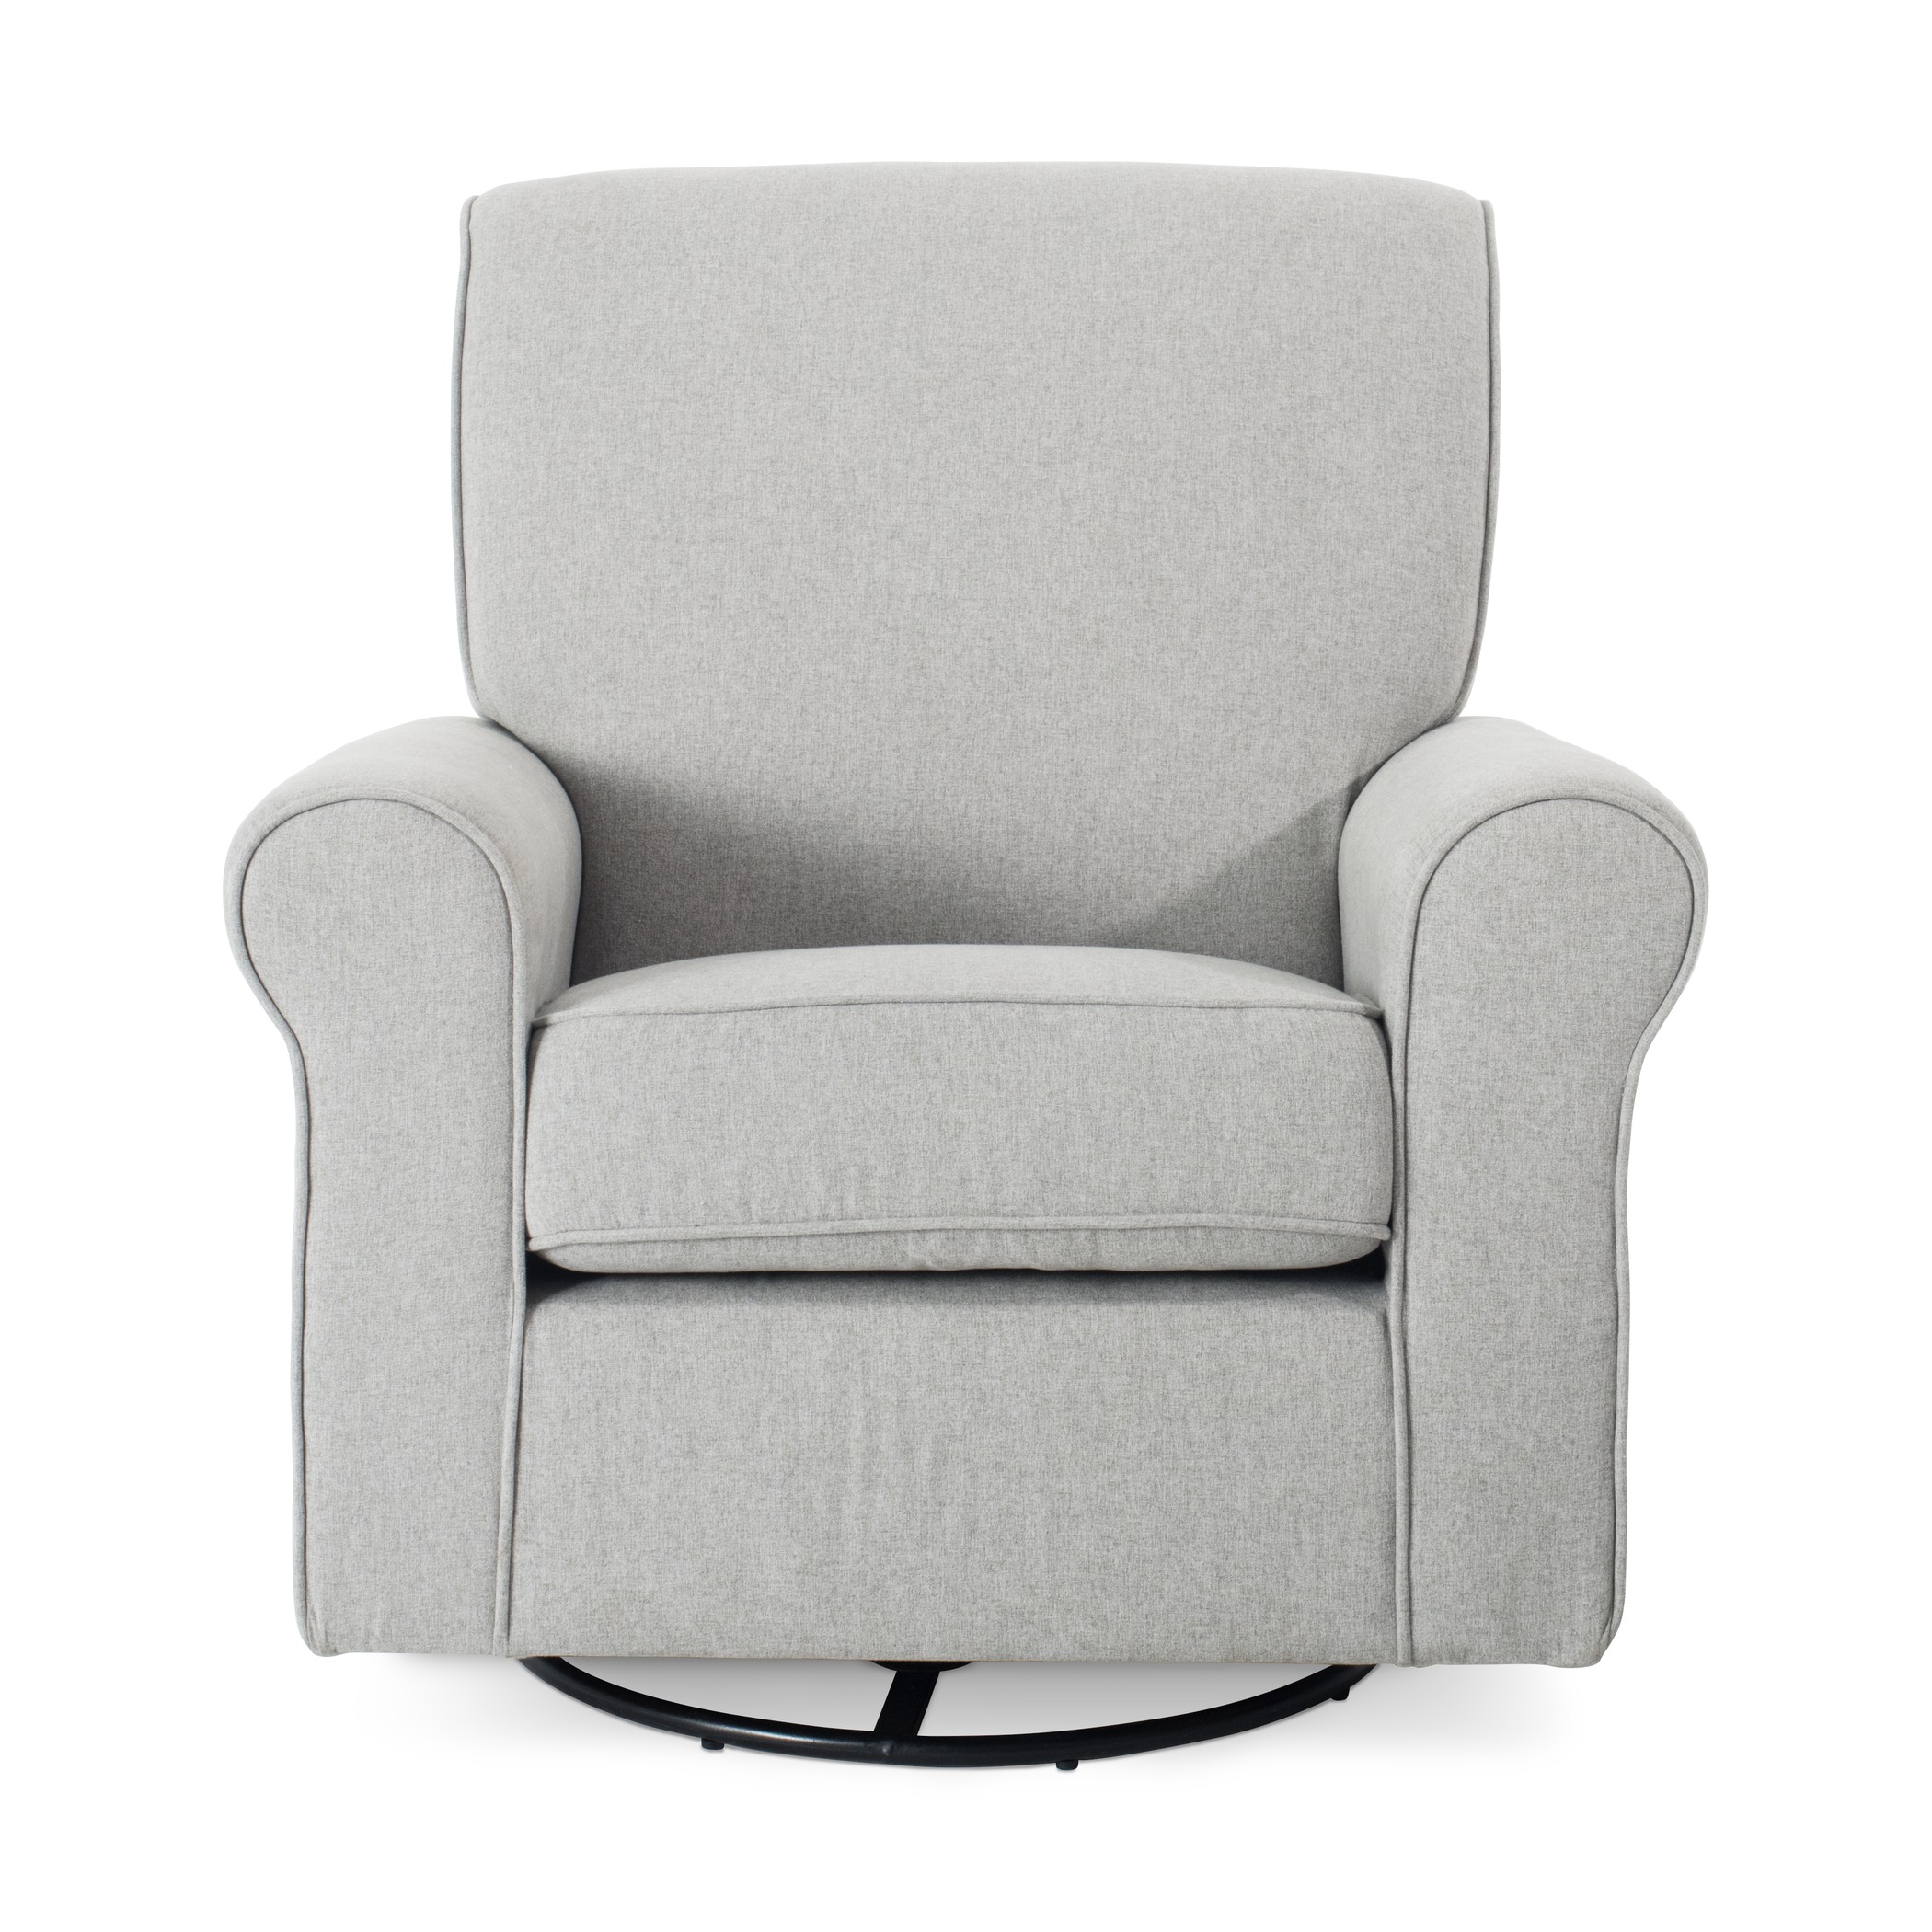 Serene Upholstered Swivel Glider Rocker Chair in Flecked Gray by Forever Eclectic - image 3 of 6